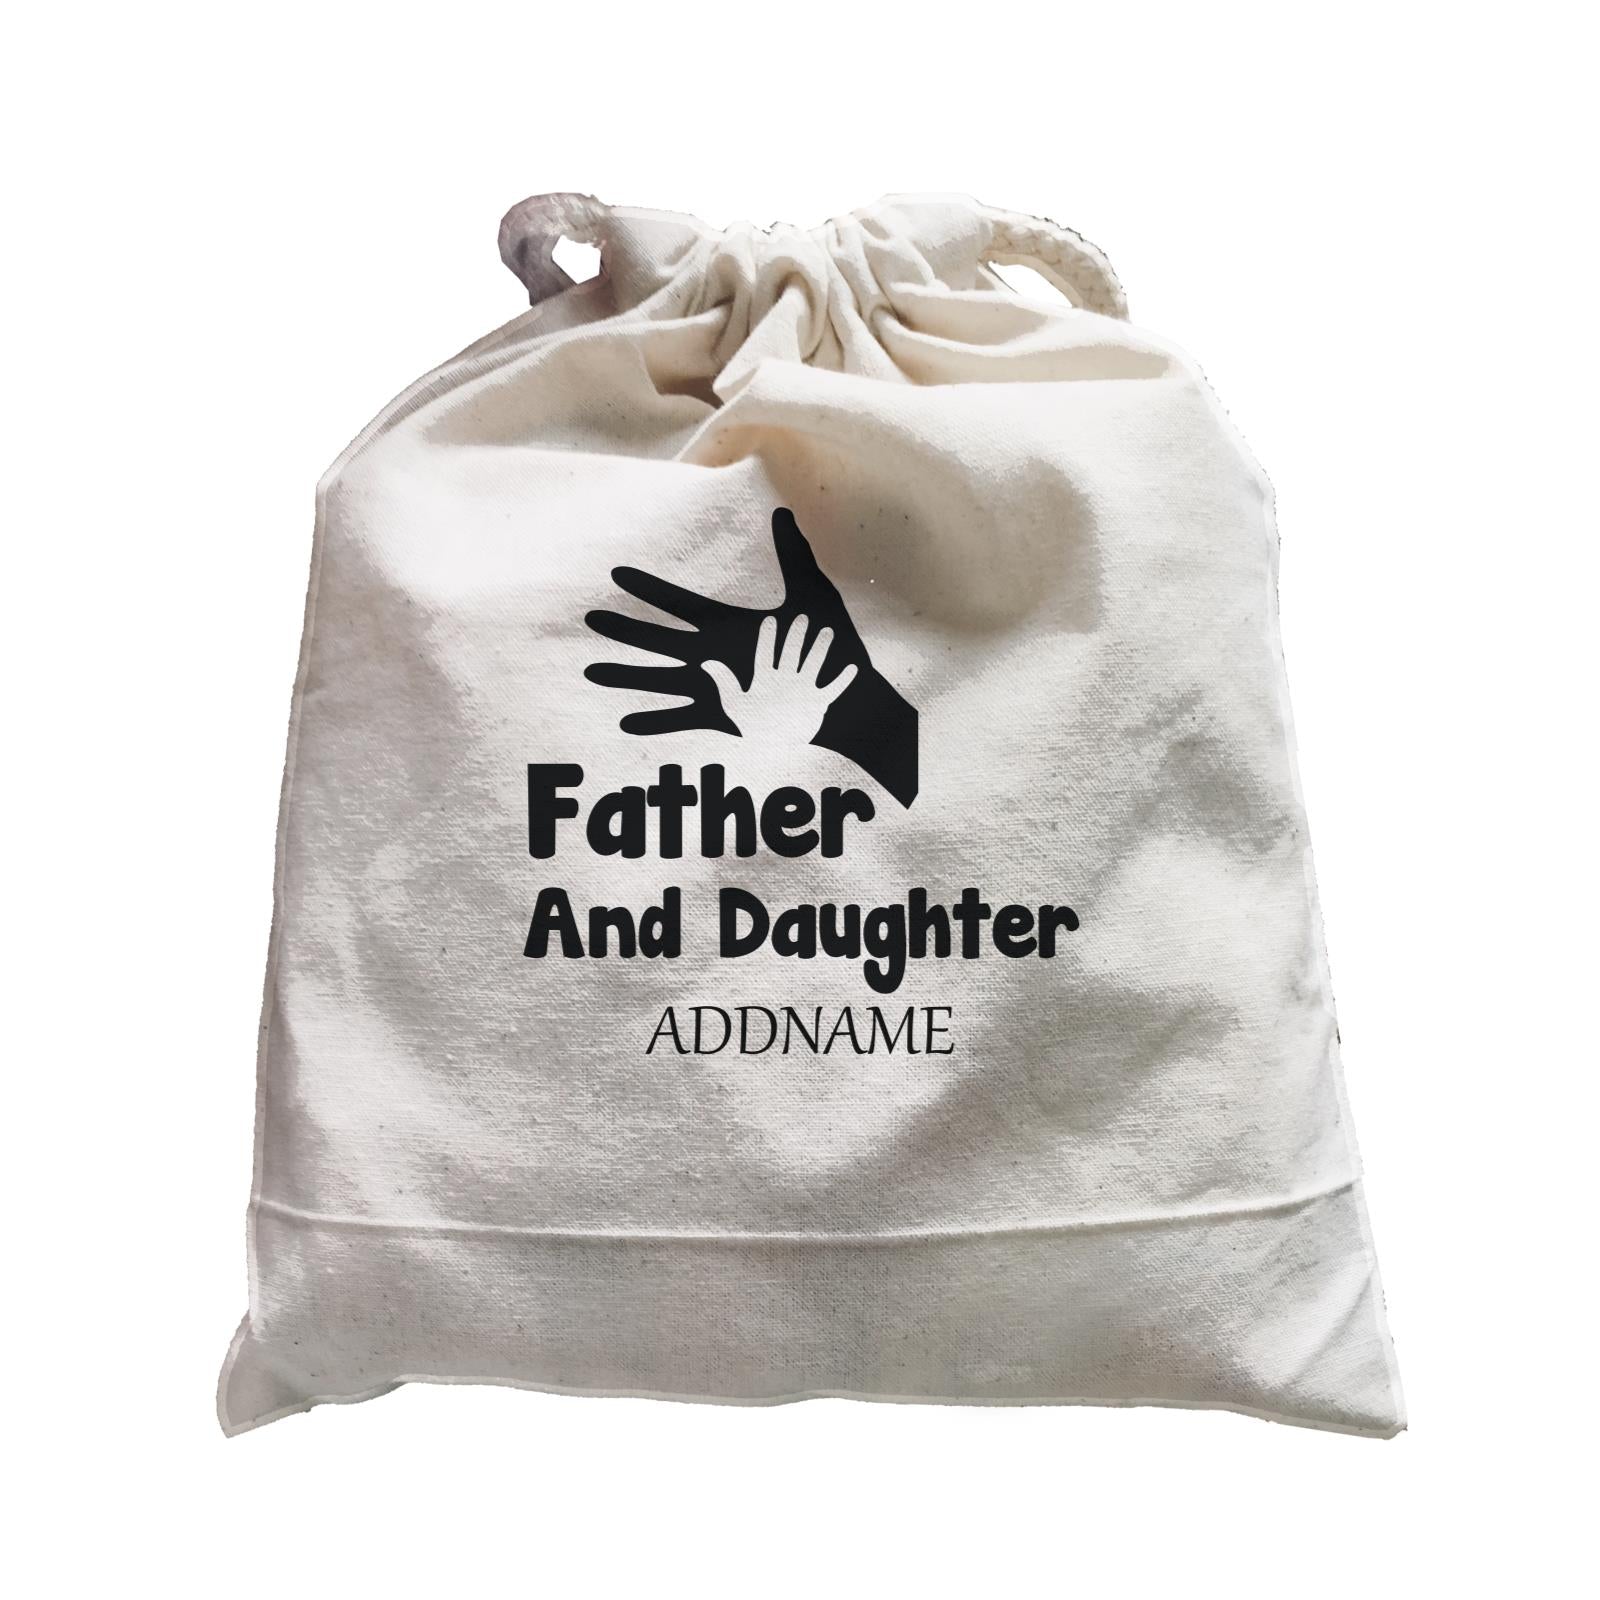 Hands Family Father And Daughter Addname Satchel